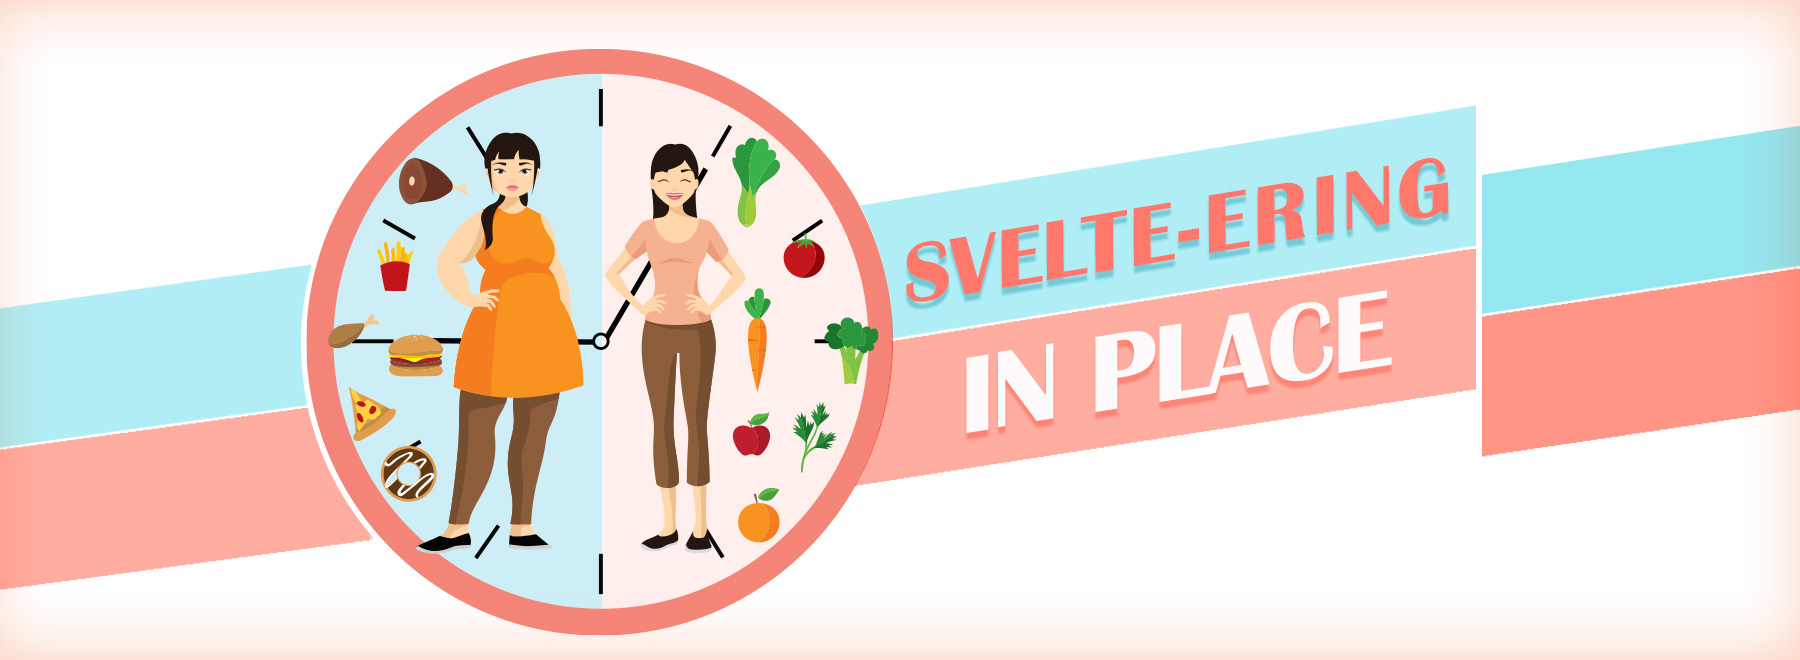 Illustration of a woman dieting and showing heavier side with junk food and more svelte look with healthy foods.